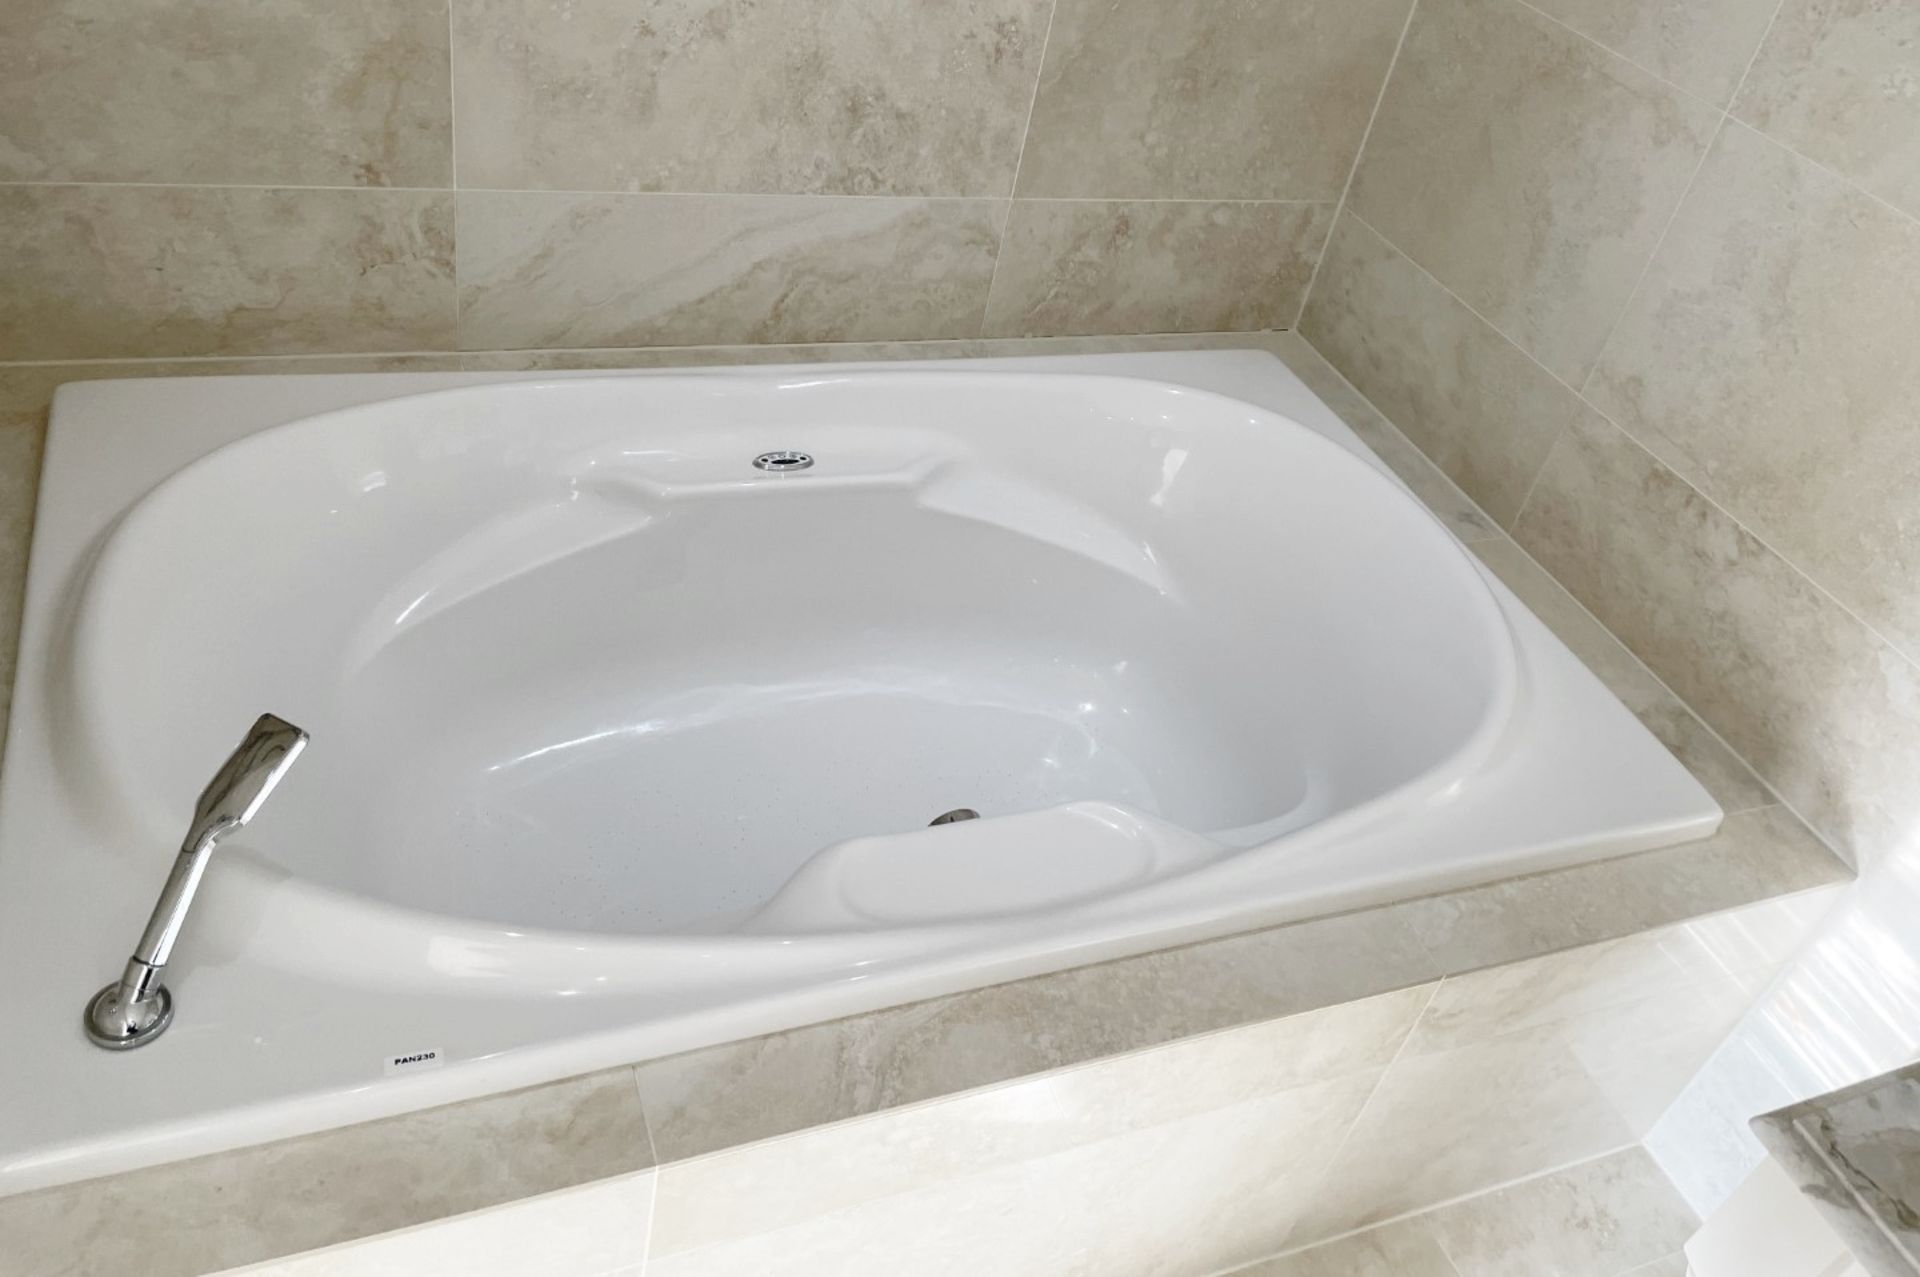 1 x AIRBATH Large Jacuzzi Spa Bath, with Axor Thermostat  - Ref: PAN230 Bed1/bth - CL896 - NO VAT - Image 11 of 20